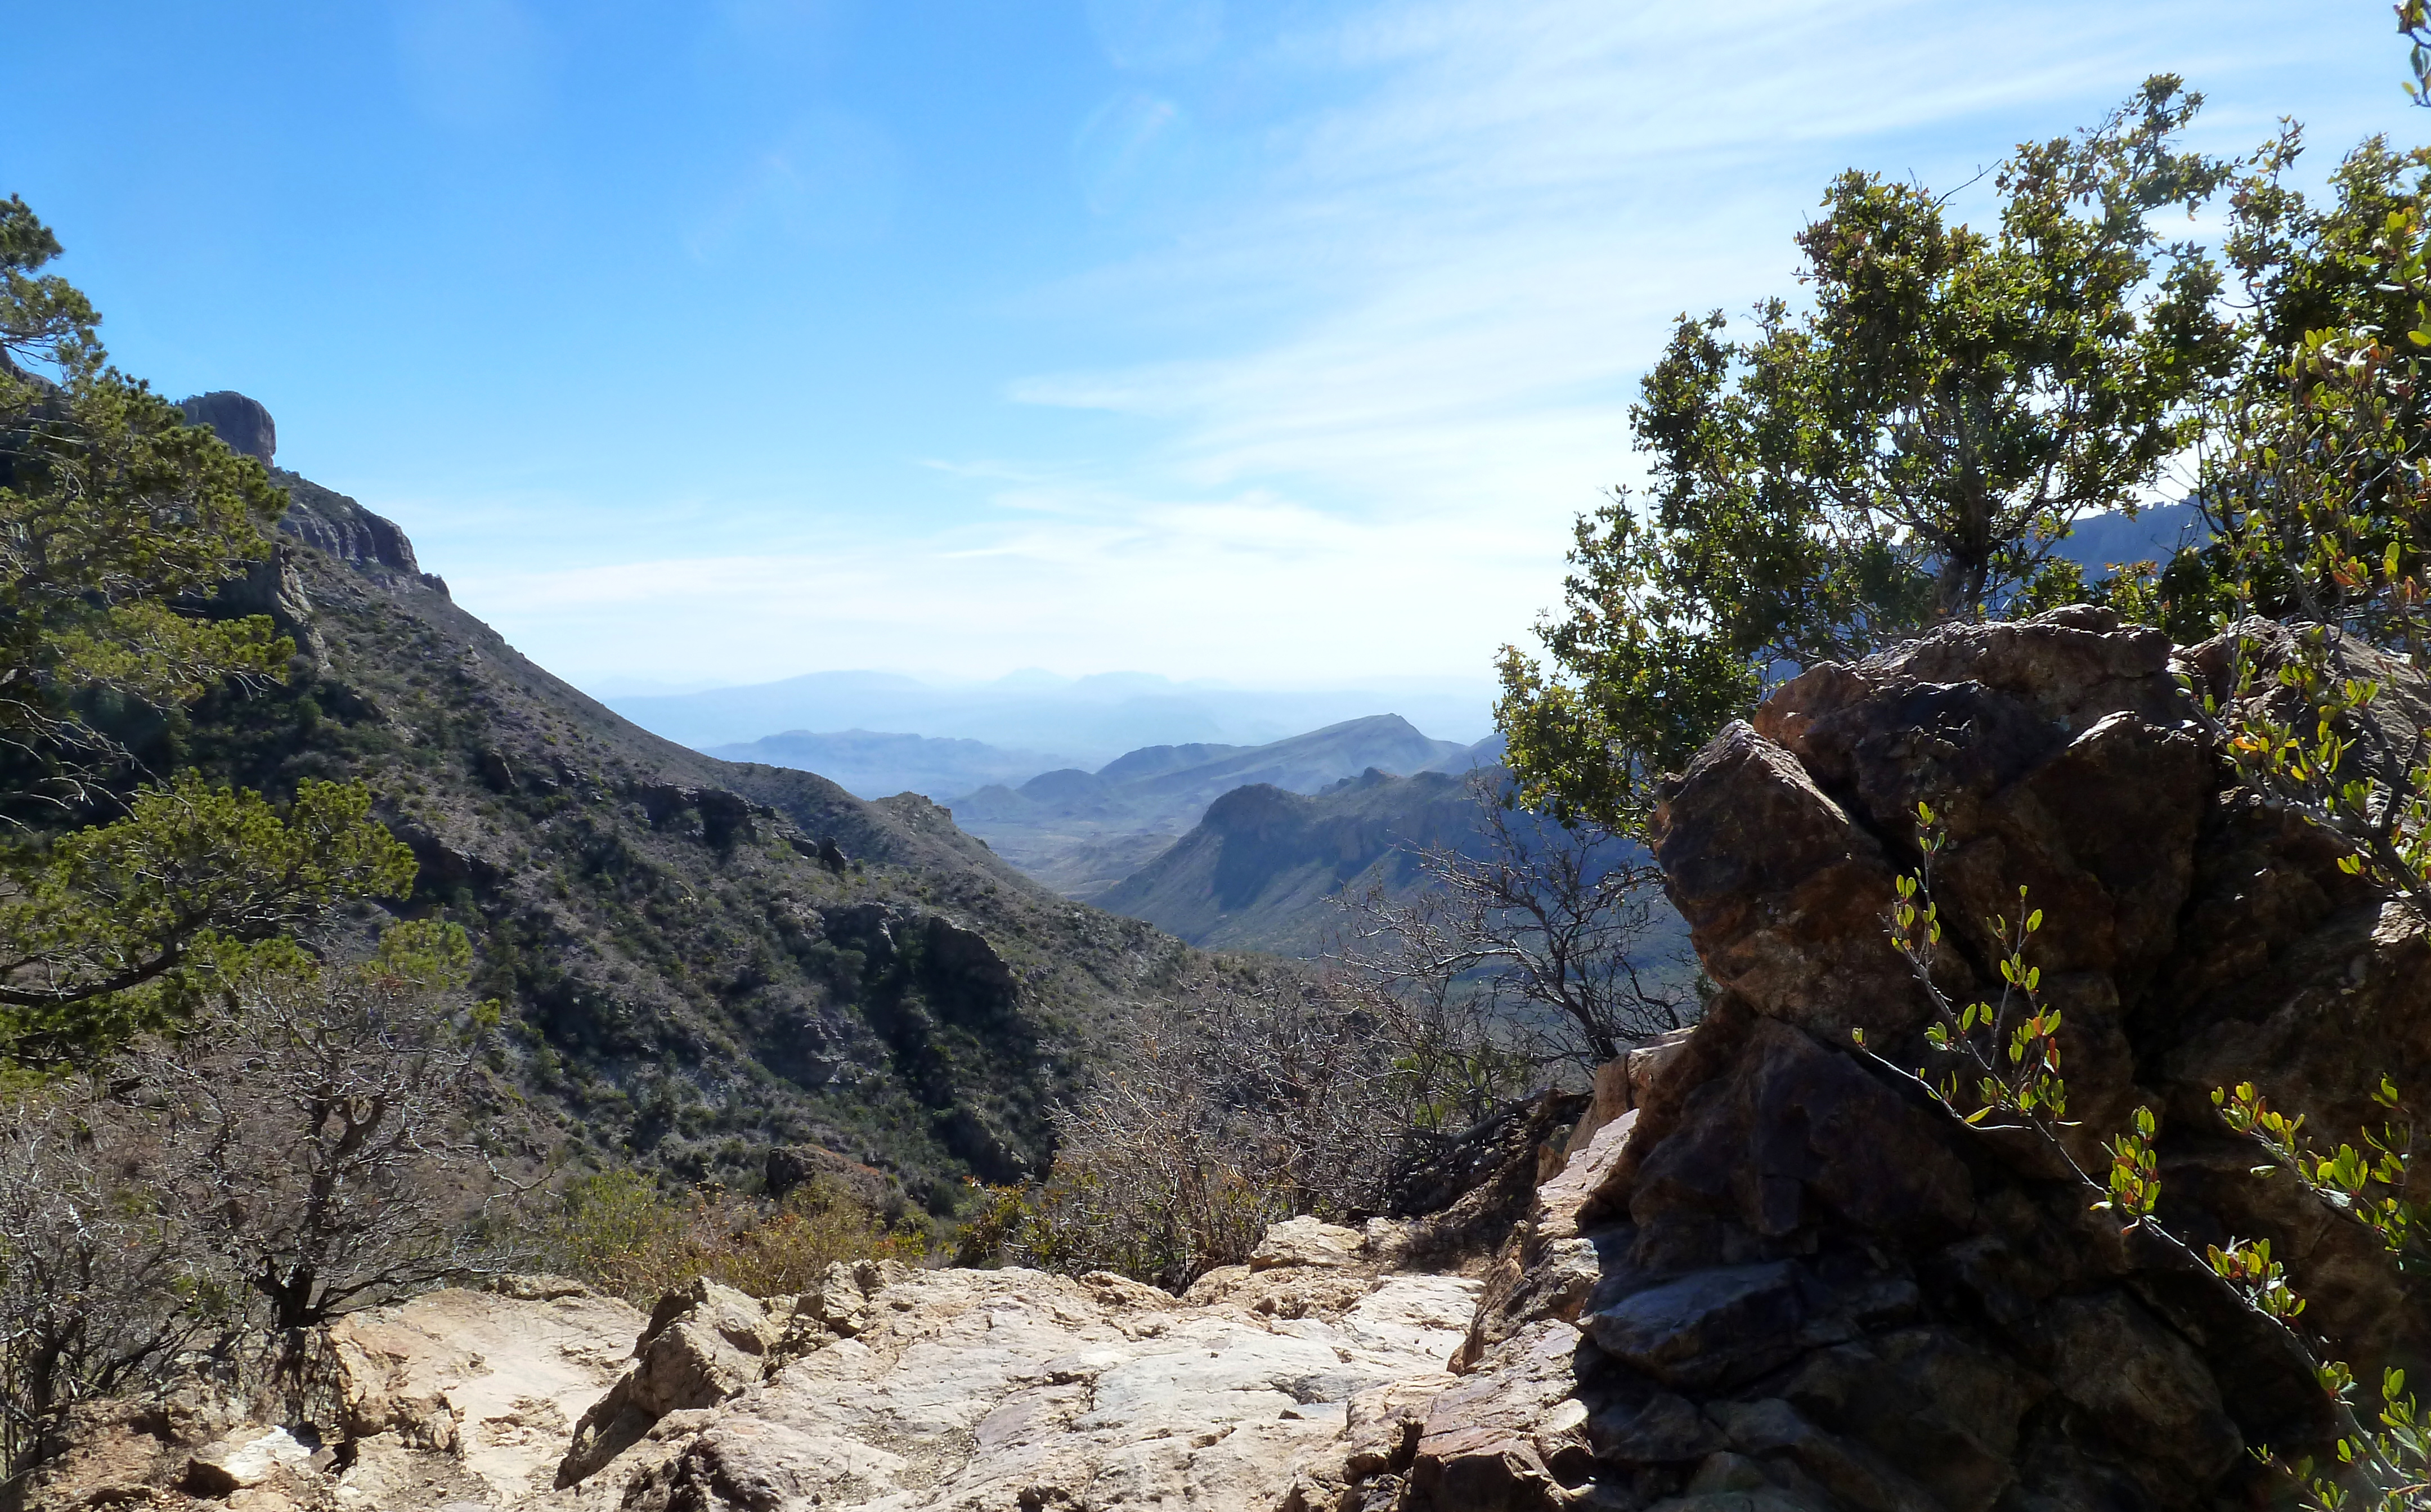 View from the Lost Mine Trail in Big Bend